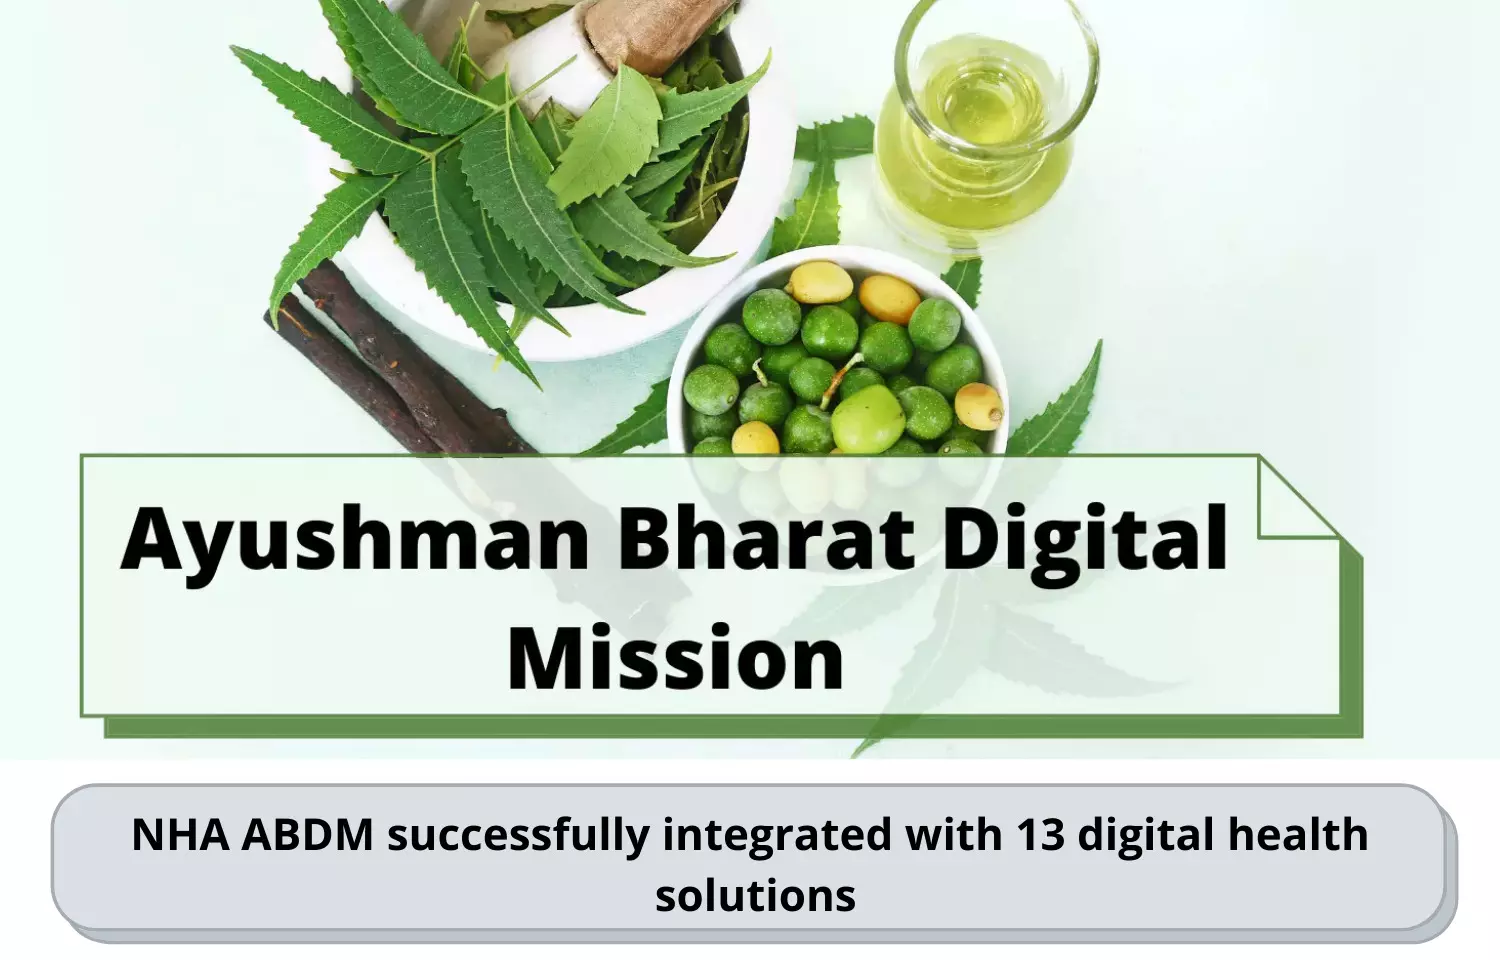 NHA ABDM successfully integrated with 13 digital health solutions